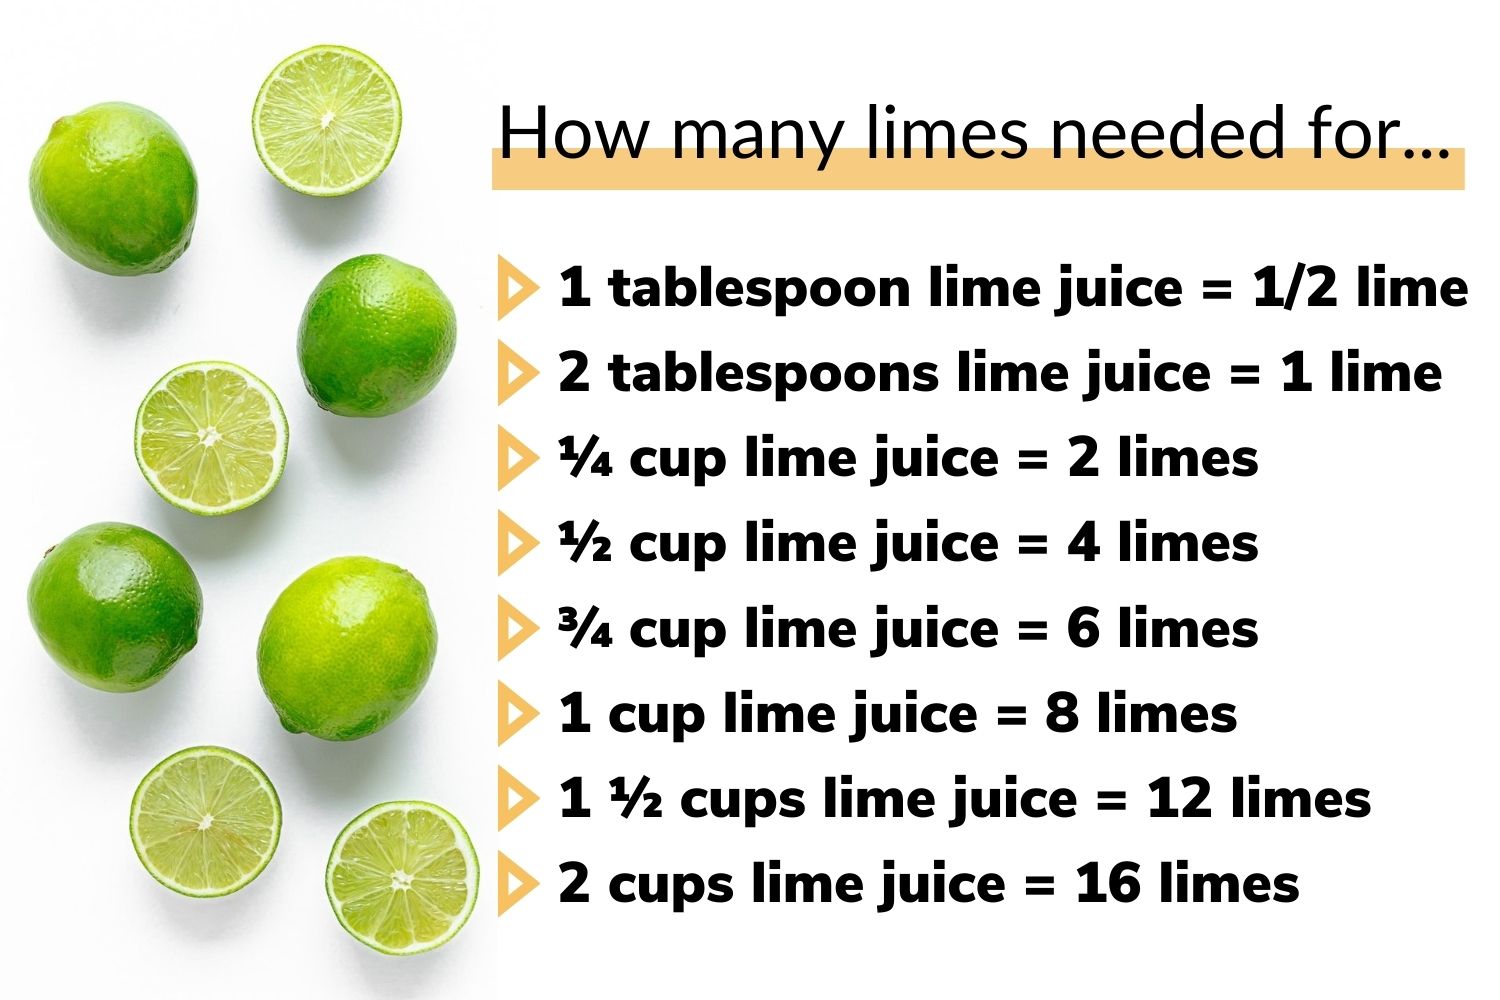 Lime juice conversion graphic showing how many limes are needed for various quantities of lime juice.